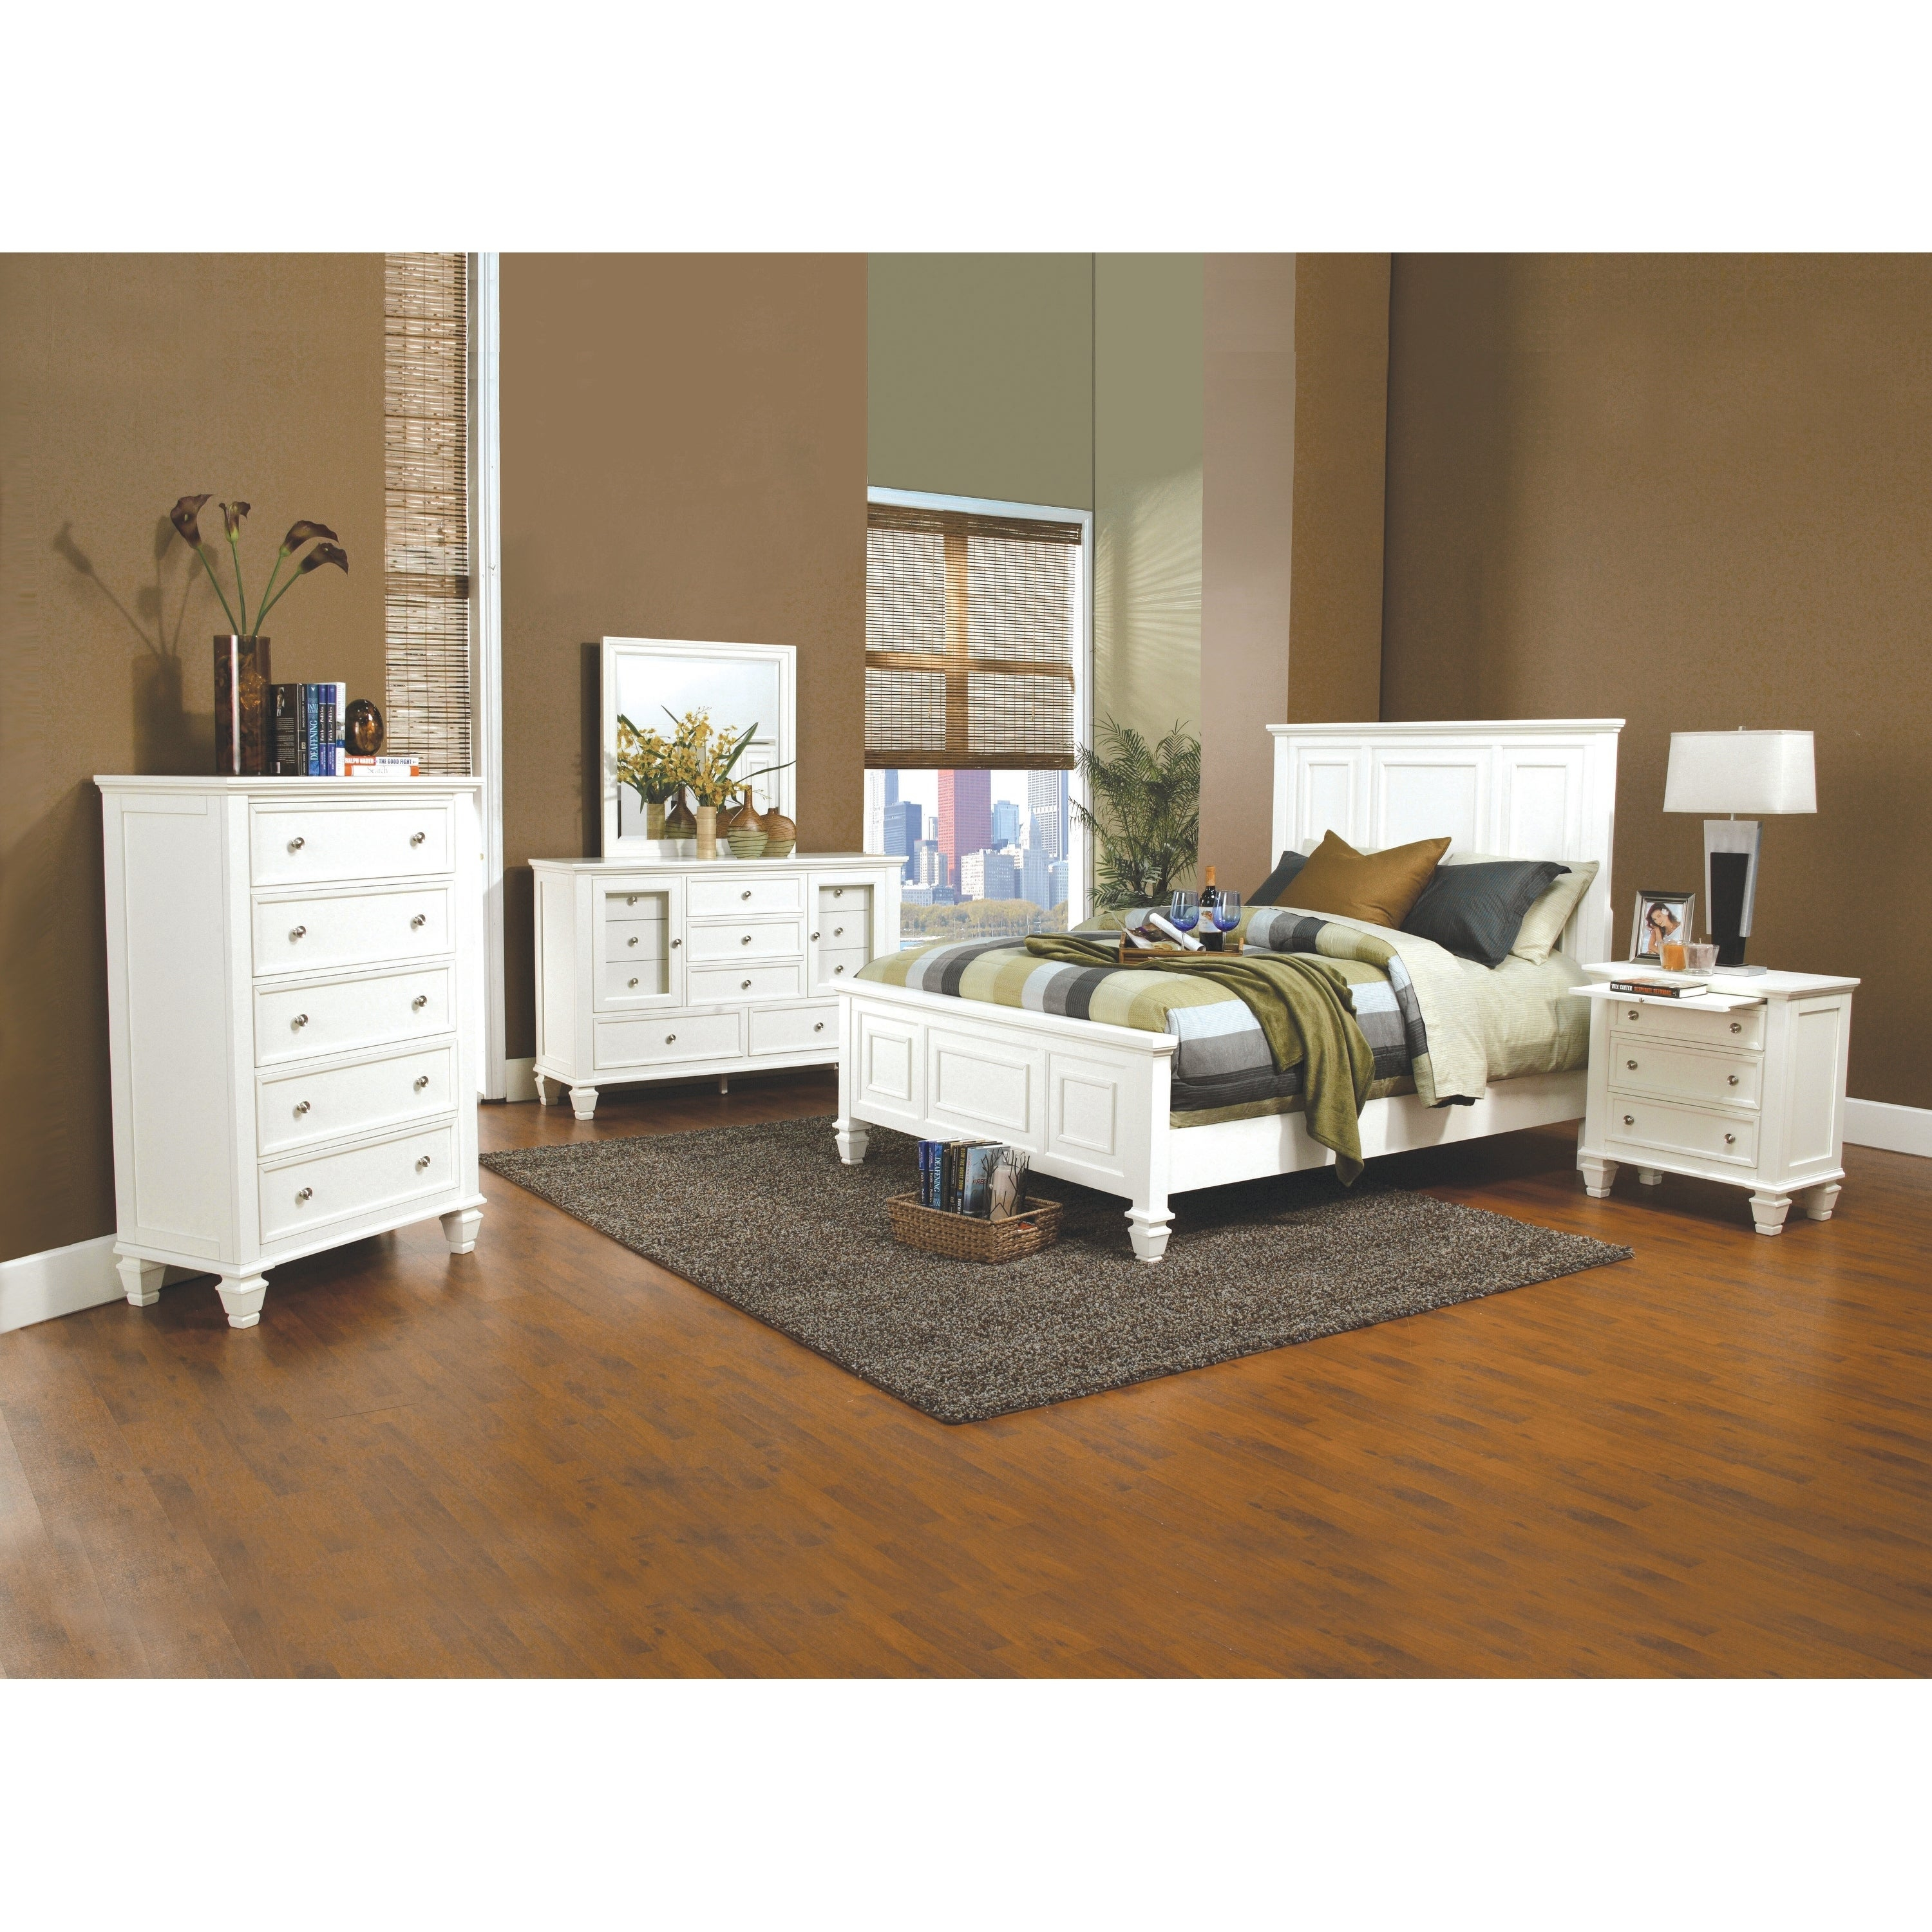 Sandy Beach 5 Piece Bedroom Set within dimensions 3000 X 3000